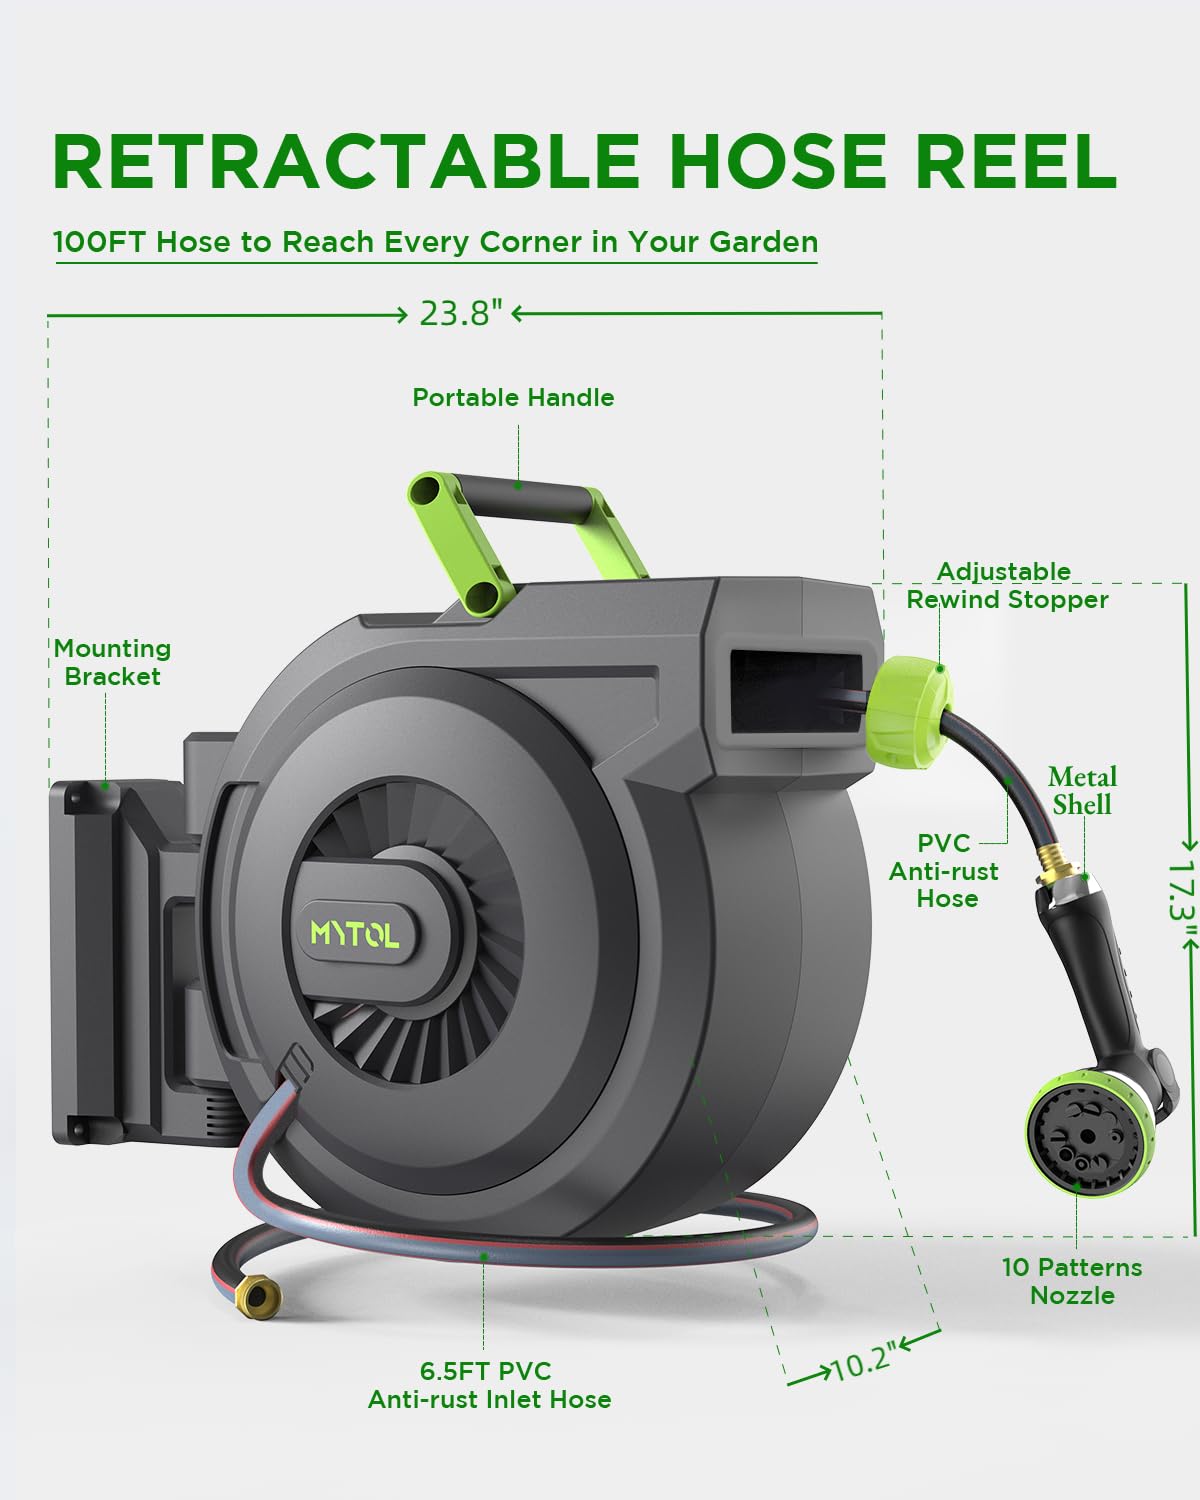 Buy MYTOL Retractable Garden Hose Reel, 1/2 Inch x 100 ft + 6 ft Wall Mount  Hose Reel with Automatic Slow Rewind System, Any Length Lock, 10 Patterns Hose  Nozzle, 180°Swivel Bracket, for Garden Watering